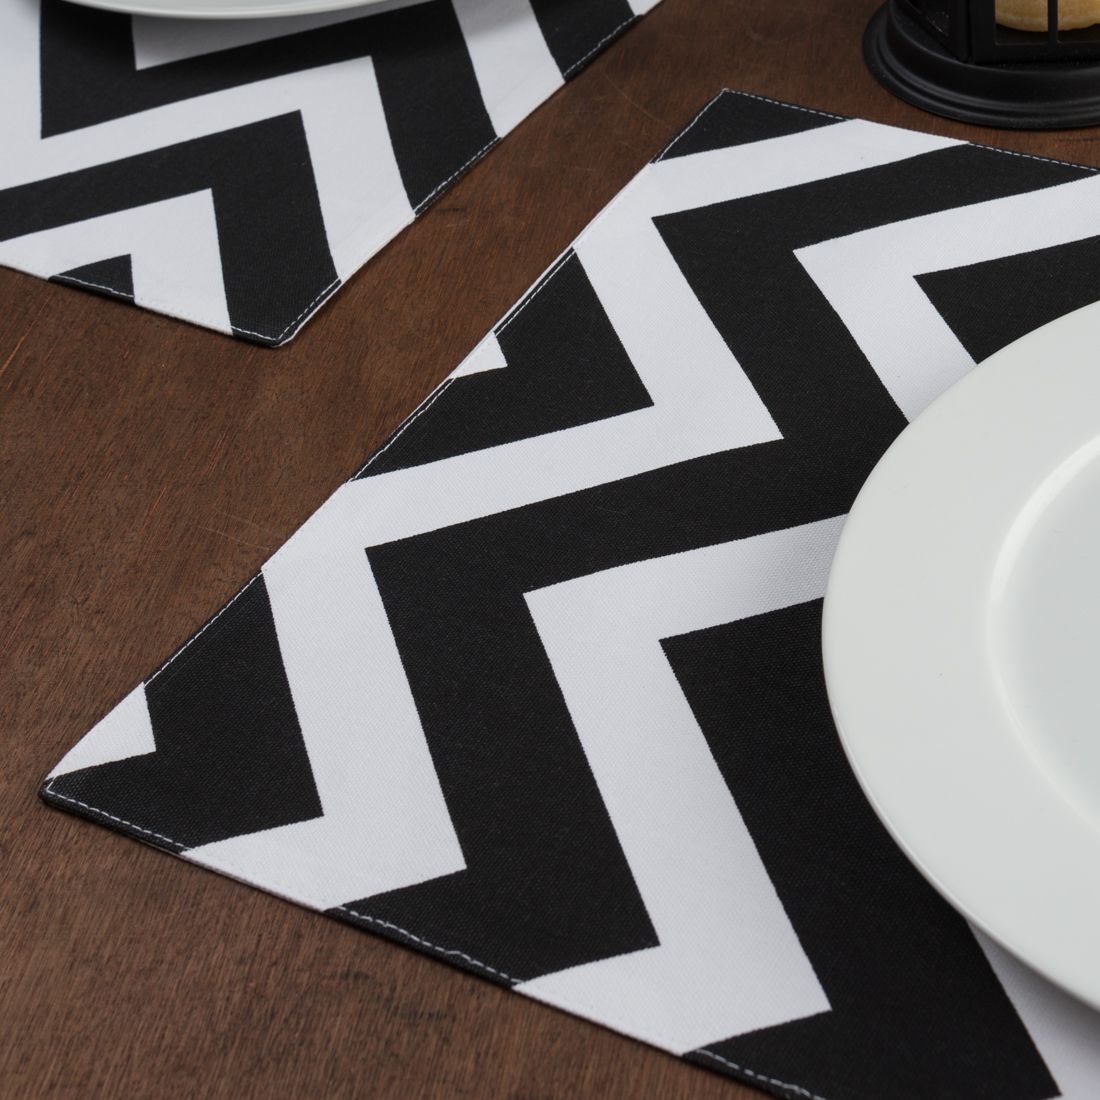 Homespice Decor 13 x 19 in. Manchester Rectangular Placemat - Black Beige &  Ivory - set of 4 595720